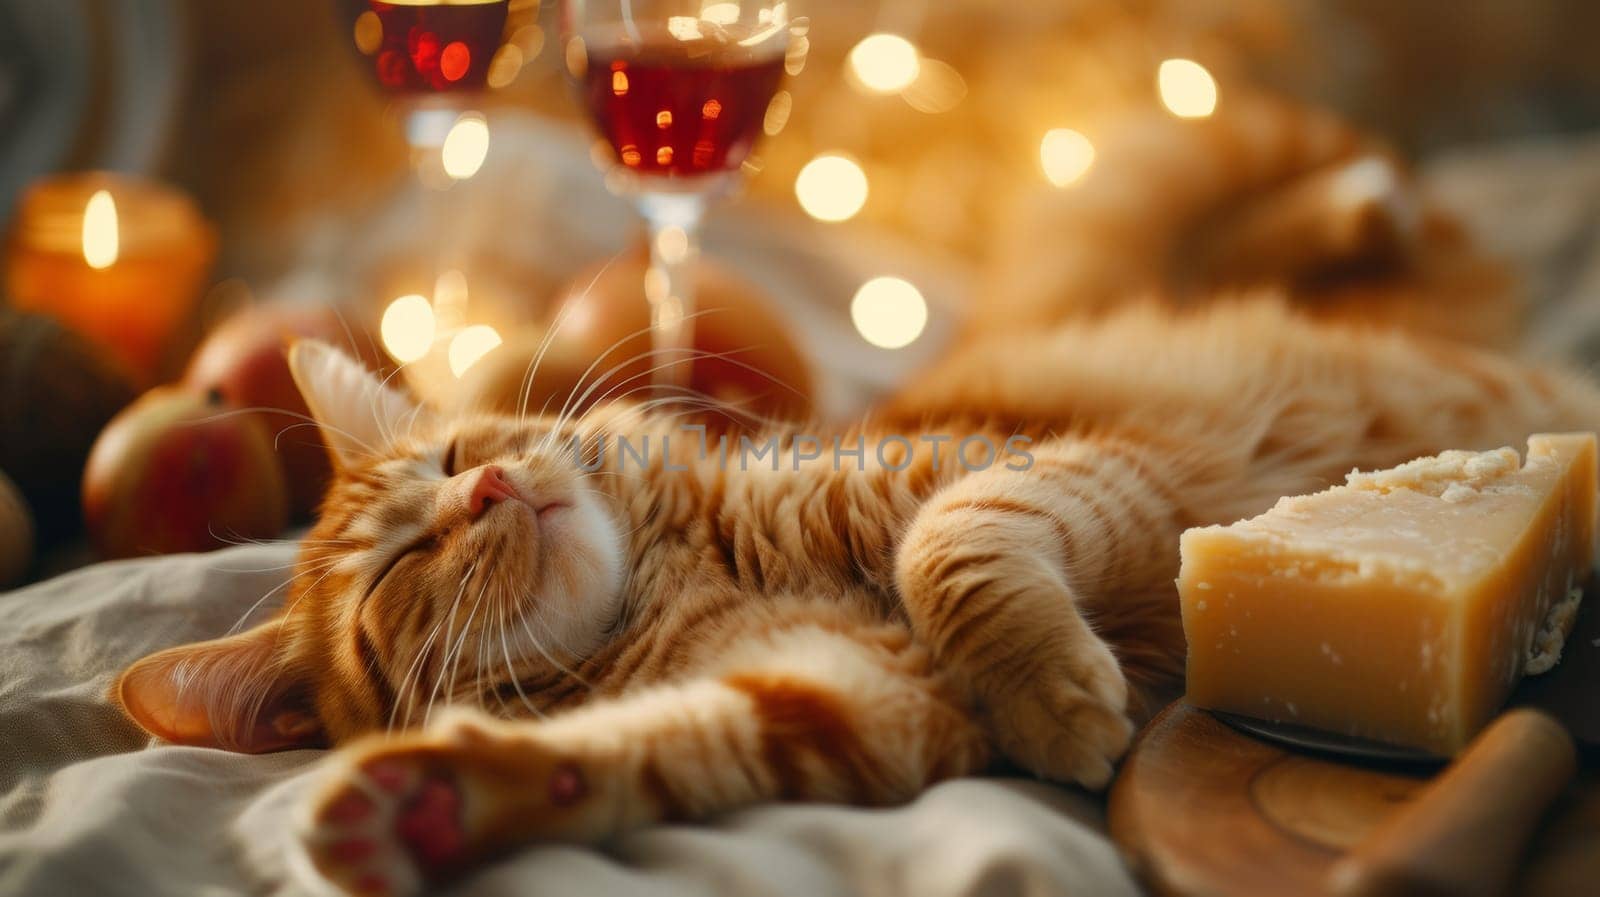 A cat laying on a bed with wine glasses and cheese